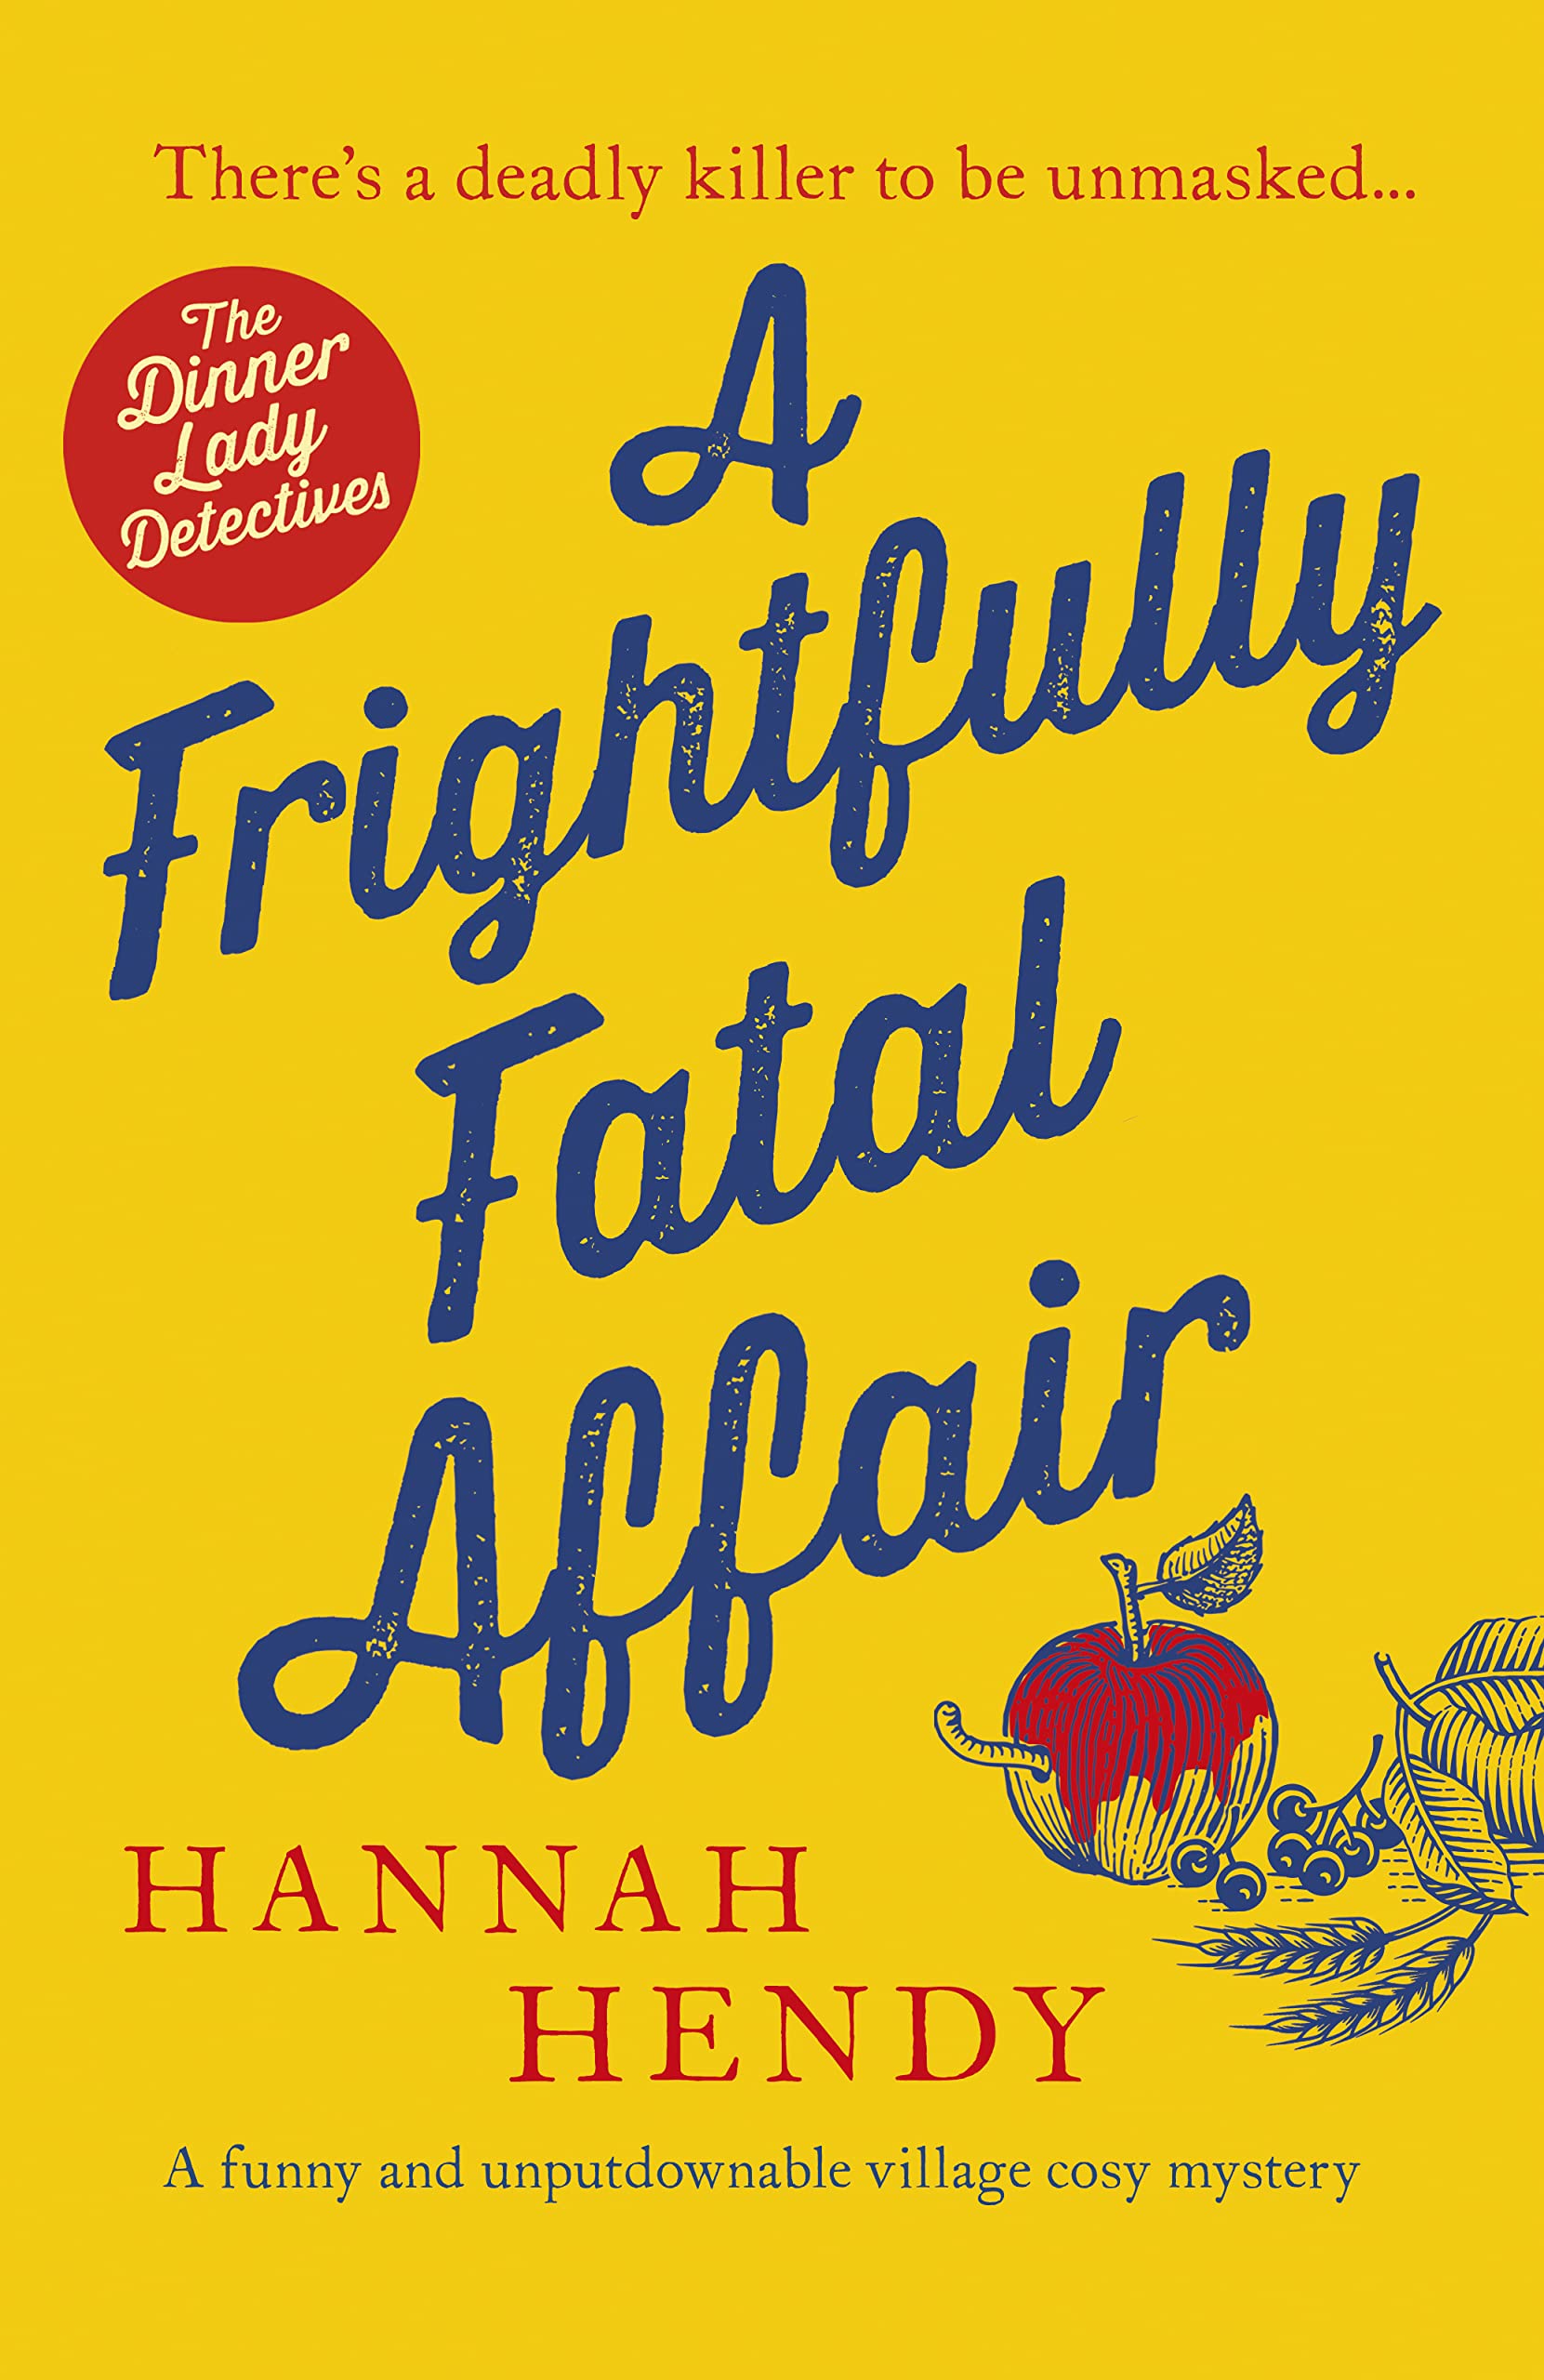 A Frightfully Fatal Affair: A funny and unputdownable village cosy mystery (The Dinner Lady Detectives Book 4)